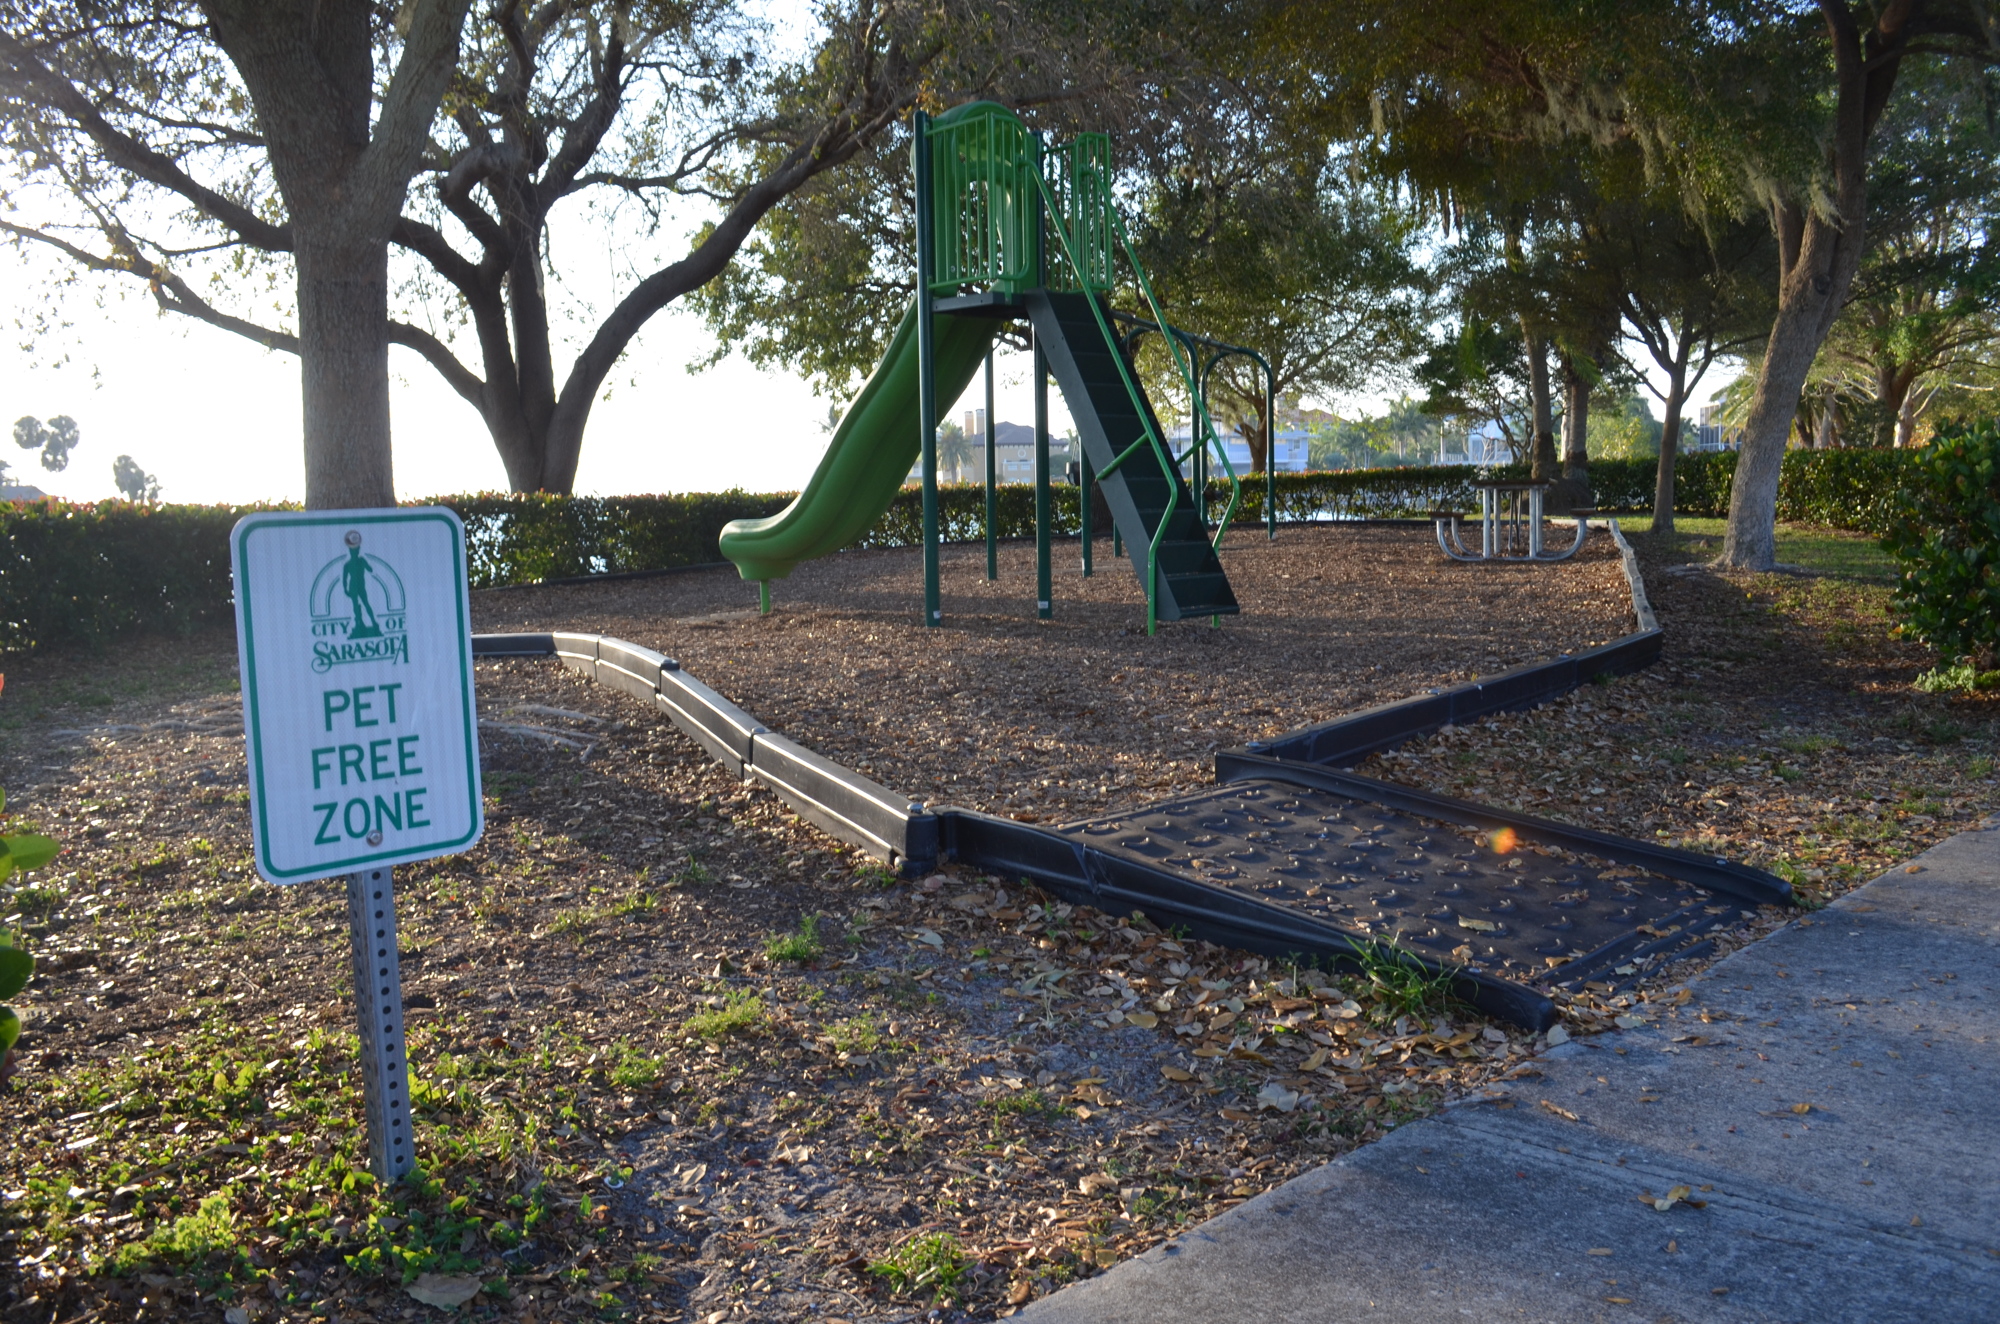 Portions of Sapphire Shores Park are designated as pet-free zones. Residents say this allows the park to function well, but city officials want more consistent policies.